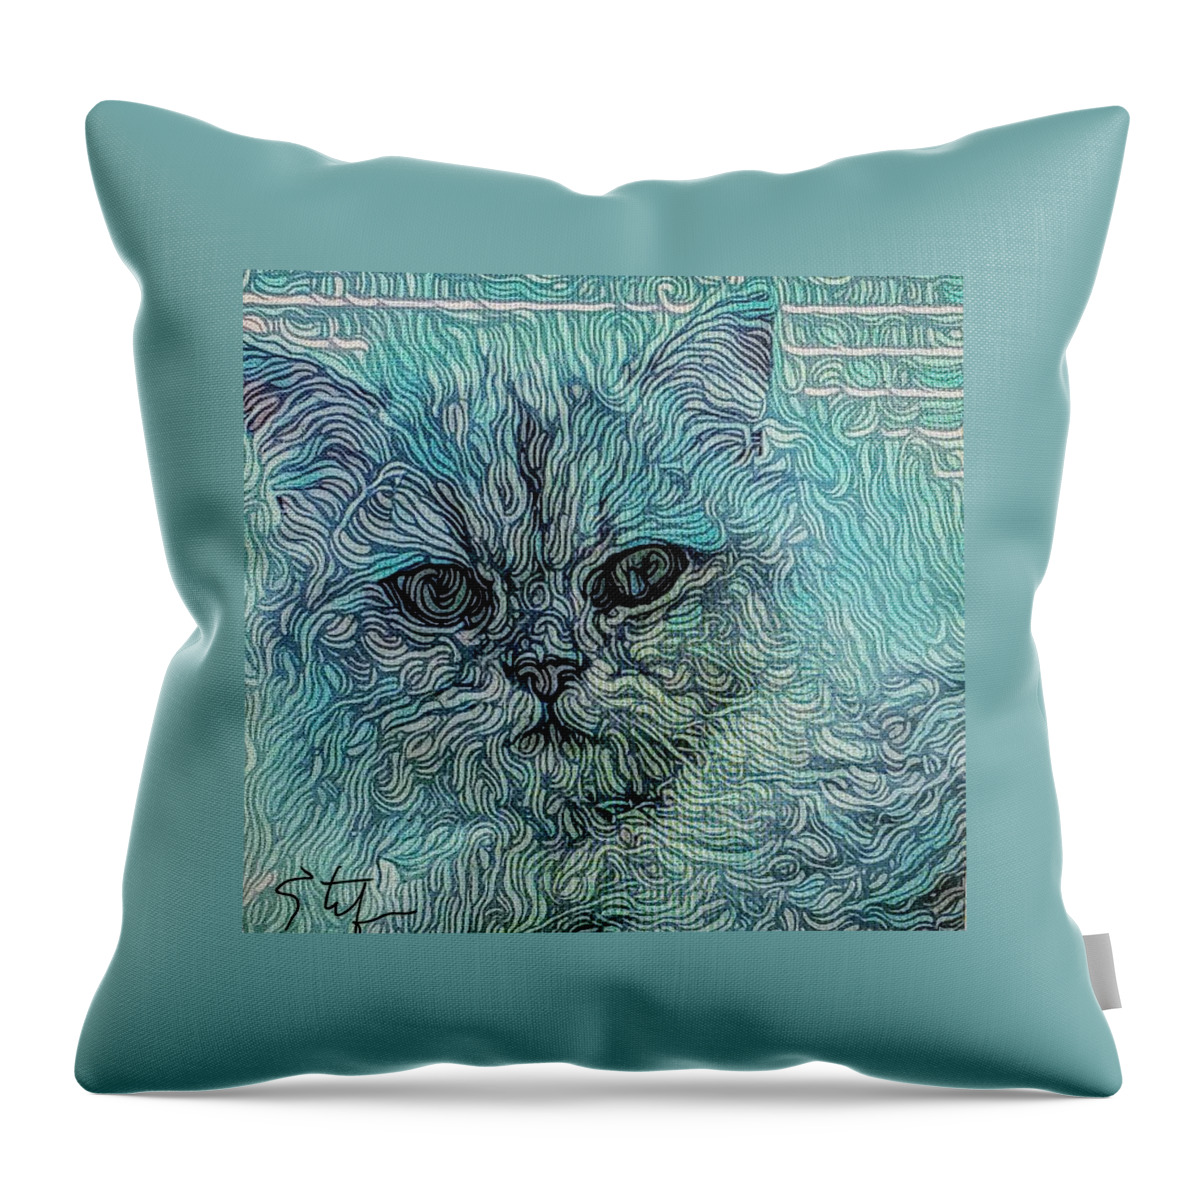 Cat Throw Pillow featuring the digital art Catmerized by Stefan Duncan